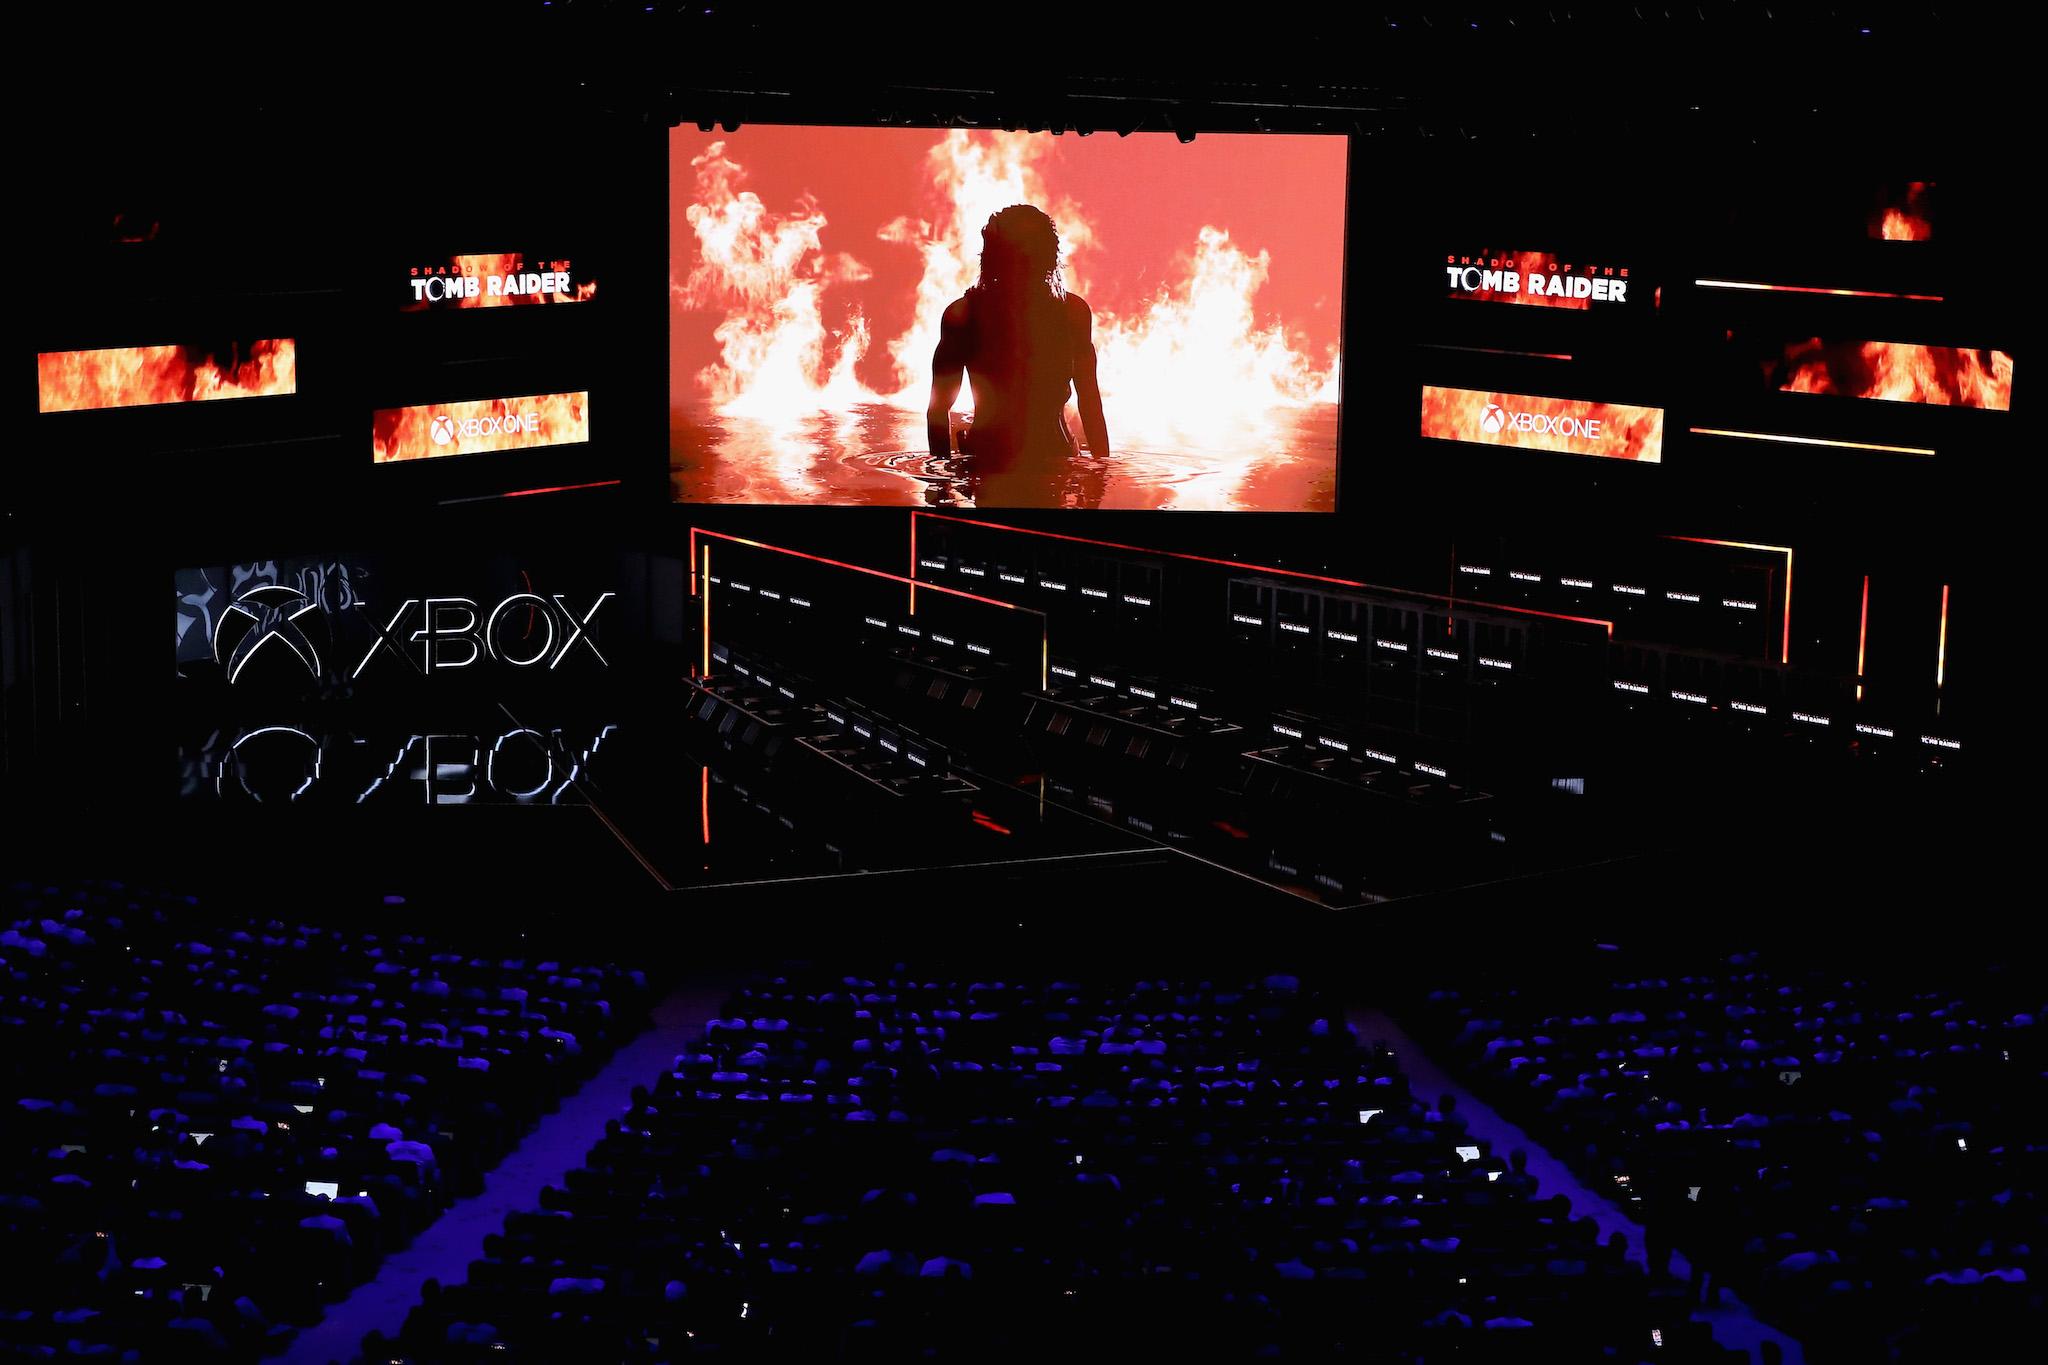 'Shadow of the Tomb Raider' by Eidos Studios - Montreal is revealed during the Microsoft xBox E3 briefing at the Microsoft Theater on June 10, 2018 in Los Angeles, California